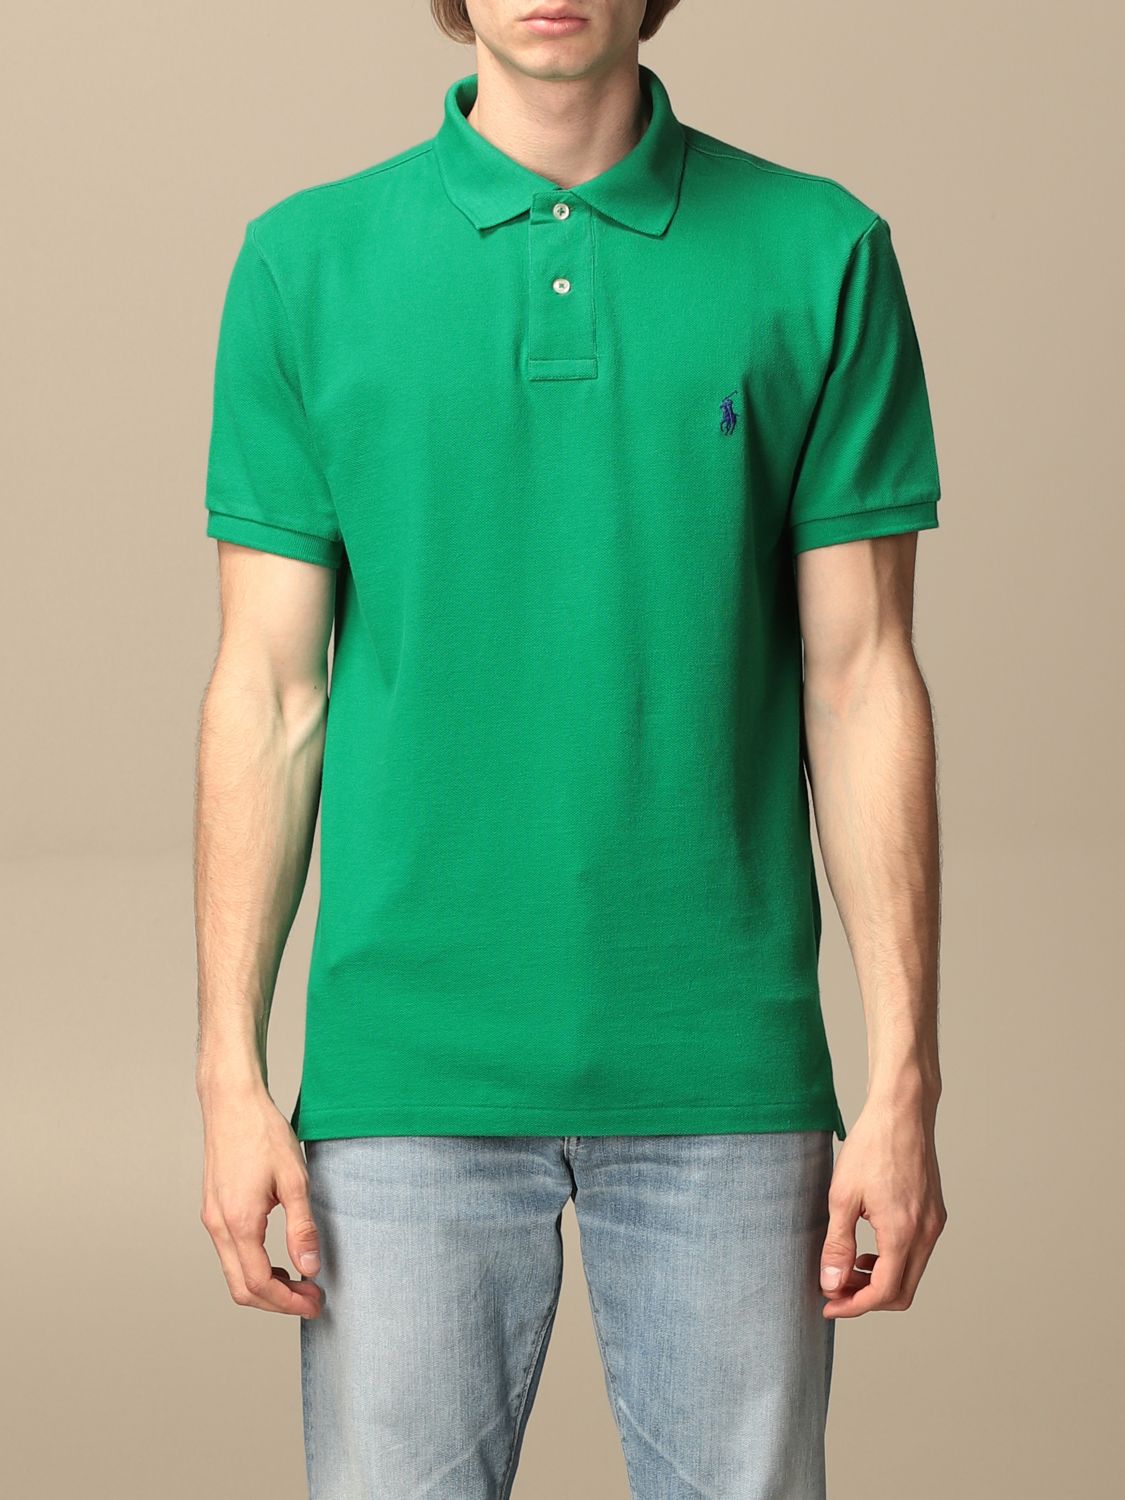 Polo Ralph Outlet: slim fit cotton polo shirt - Green Polo Ralph Lauren polo shirt 710795080 online GIGLIO.COM